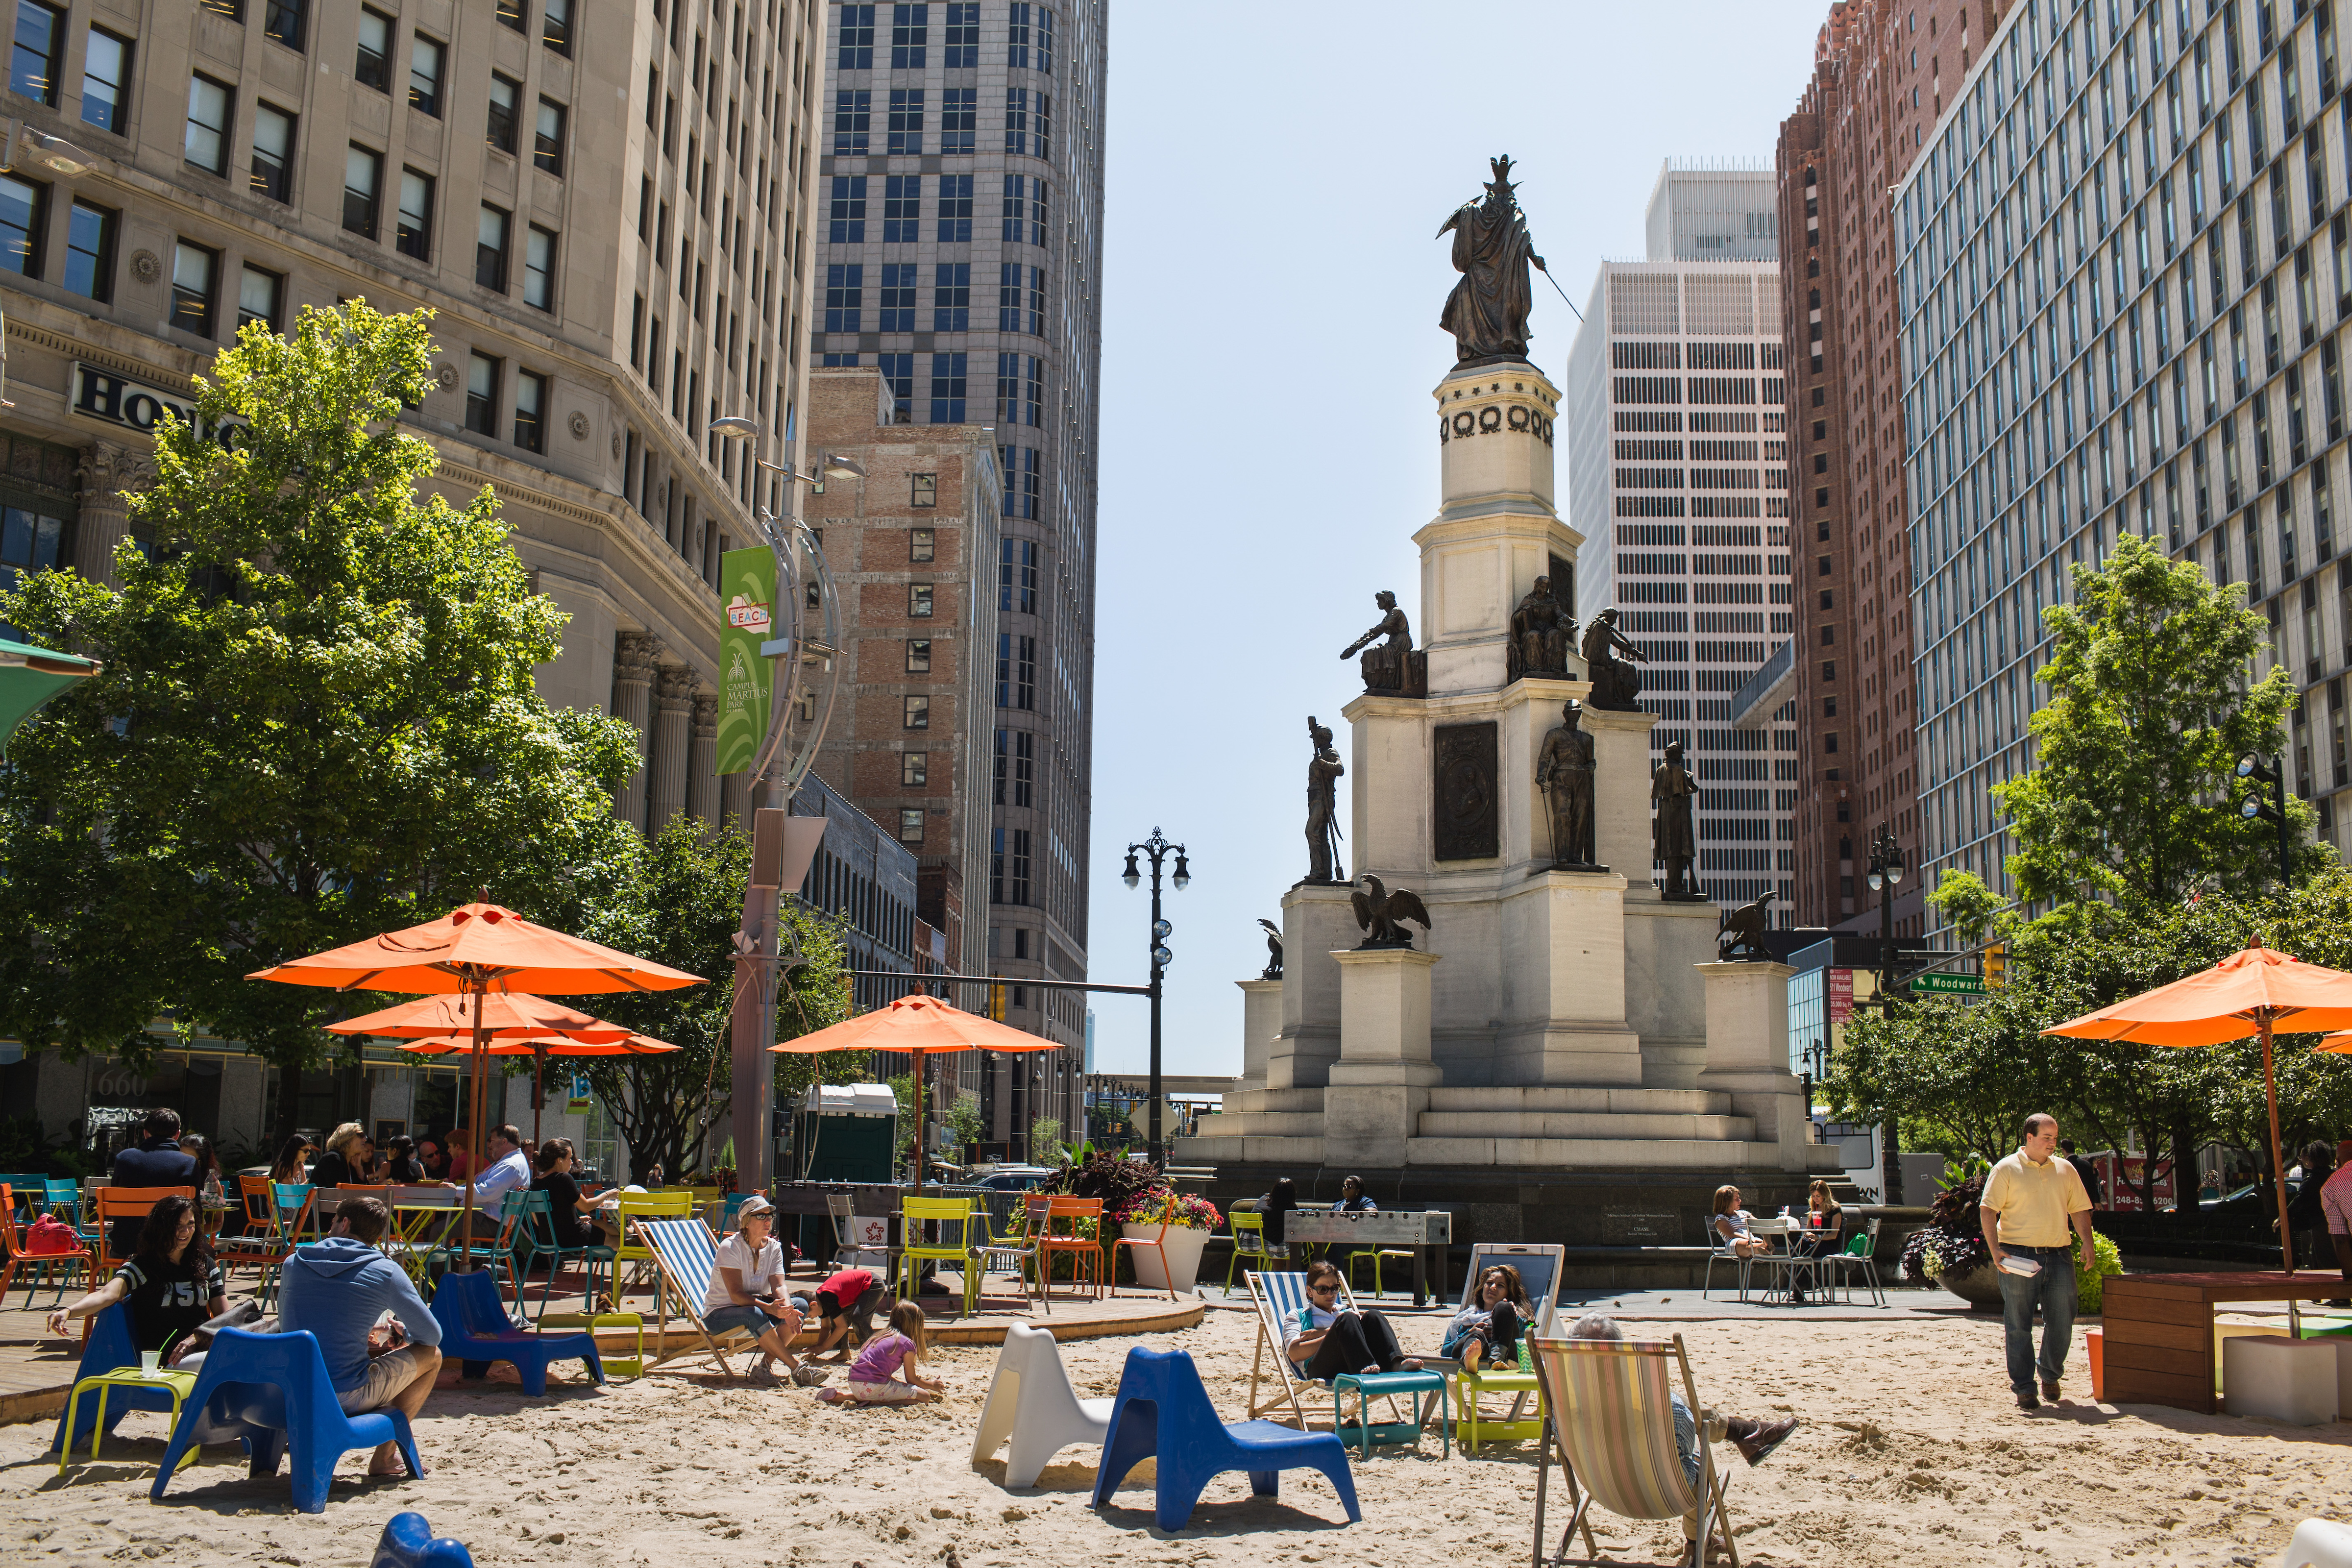 The beach at Campus Martius is filled with colored umbrellas and plastic chairs.